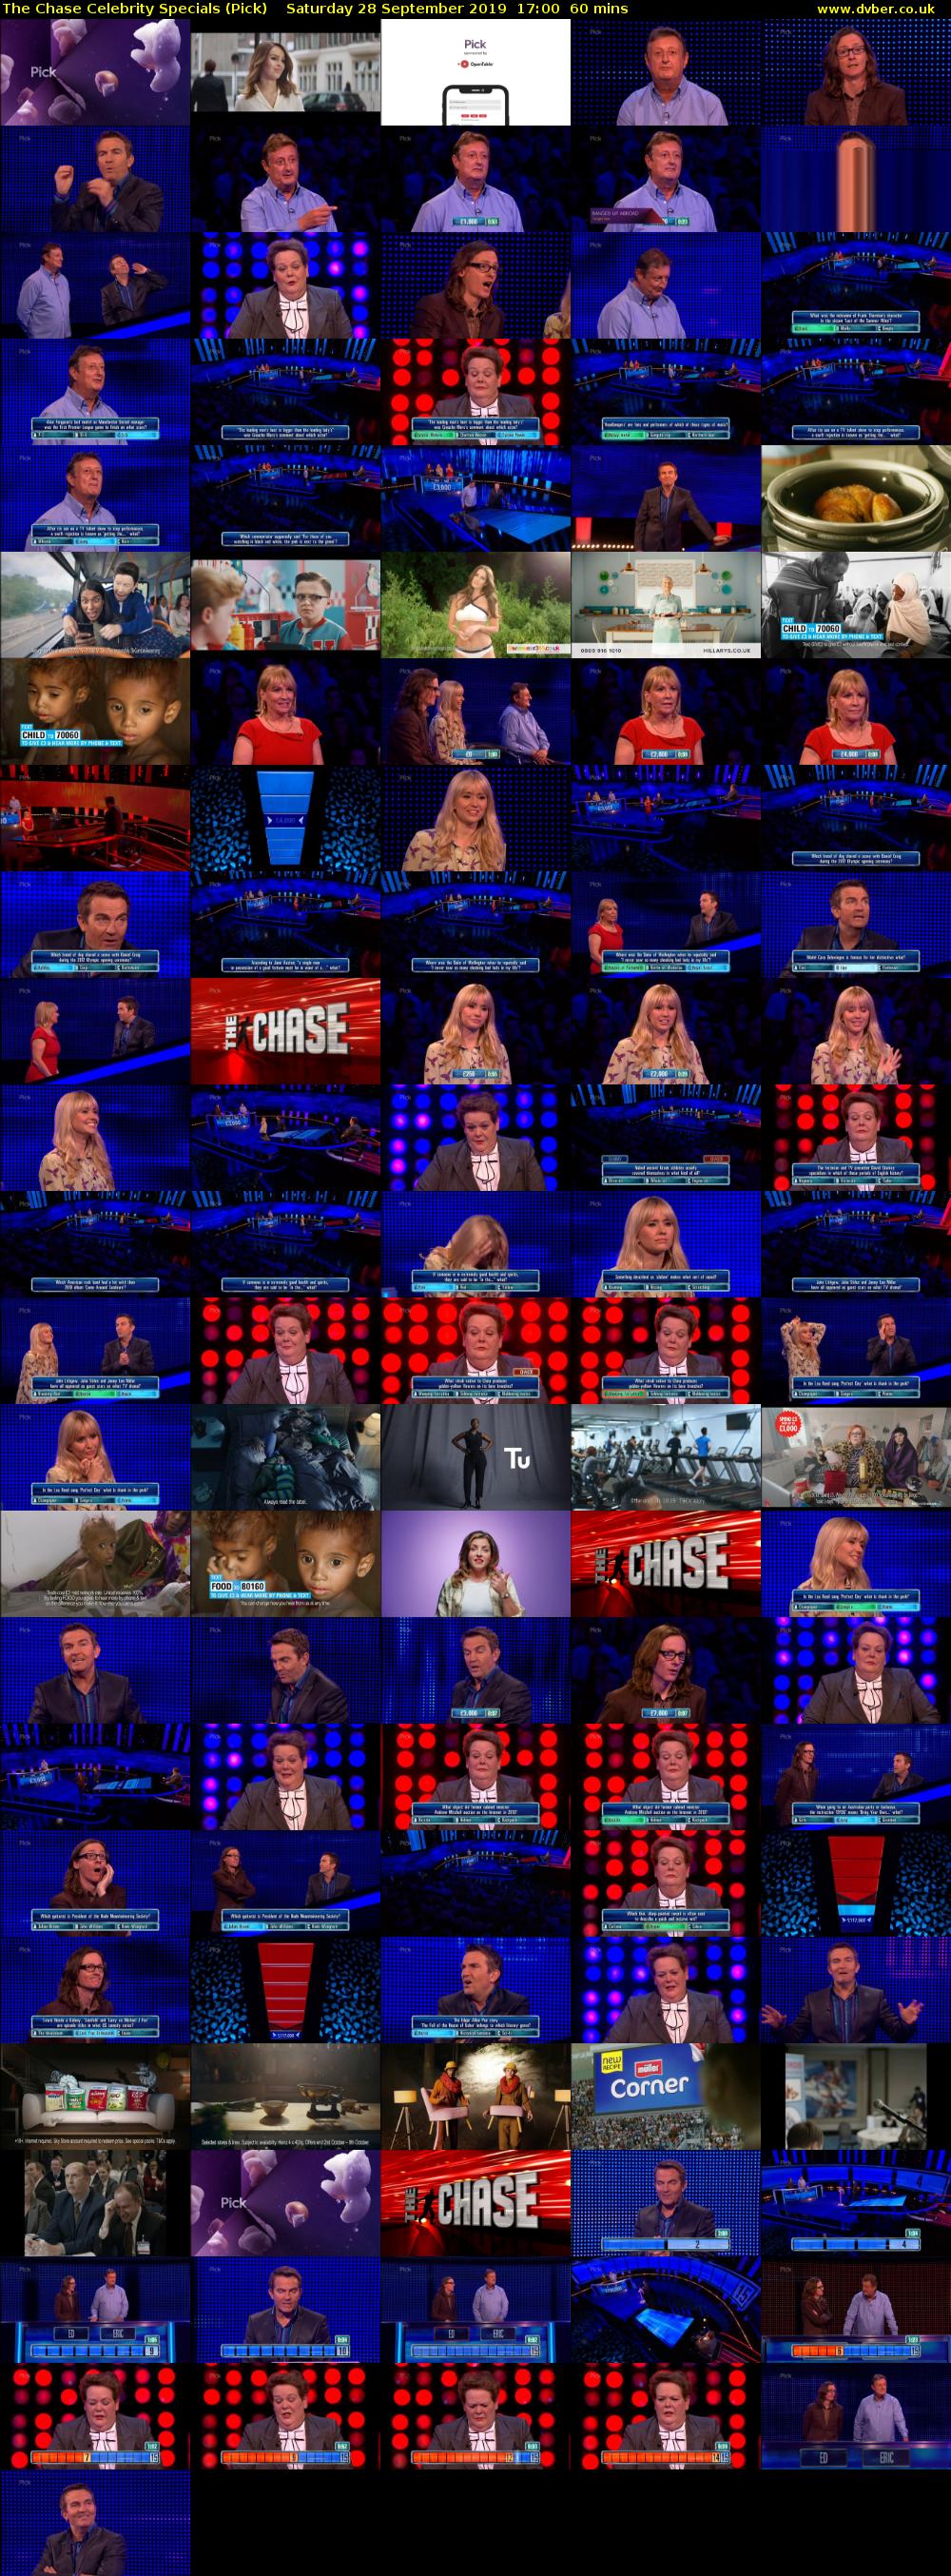 The Chase Celebrity Specials (Pick) Saturday 28 September 2019 17:00 - 18:00